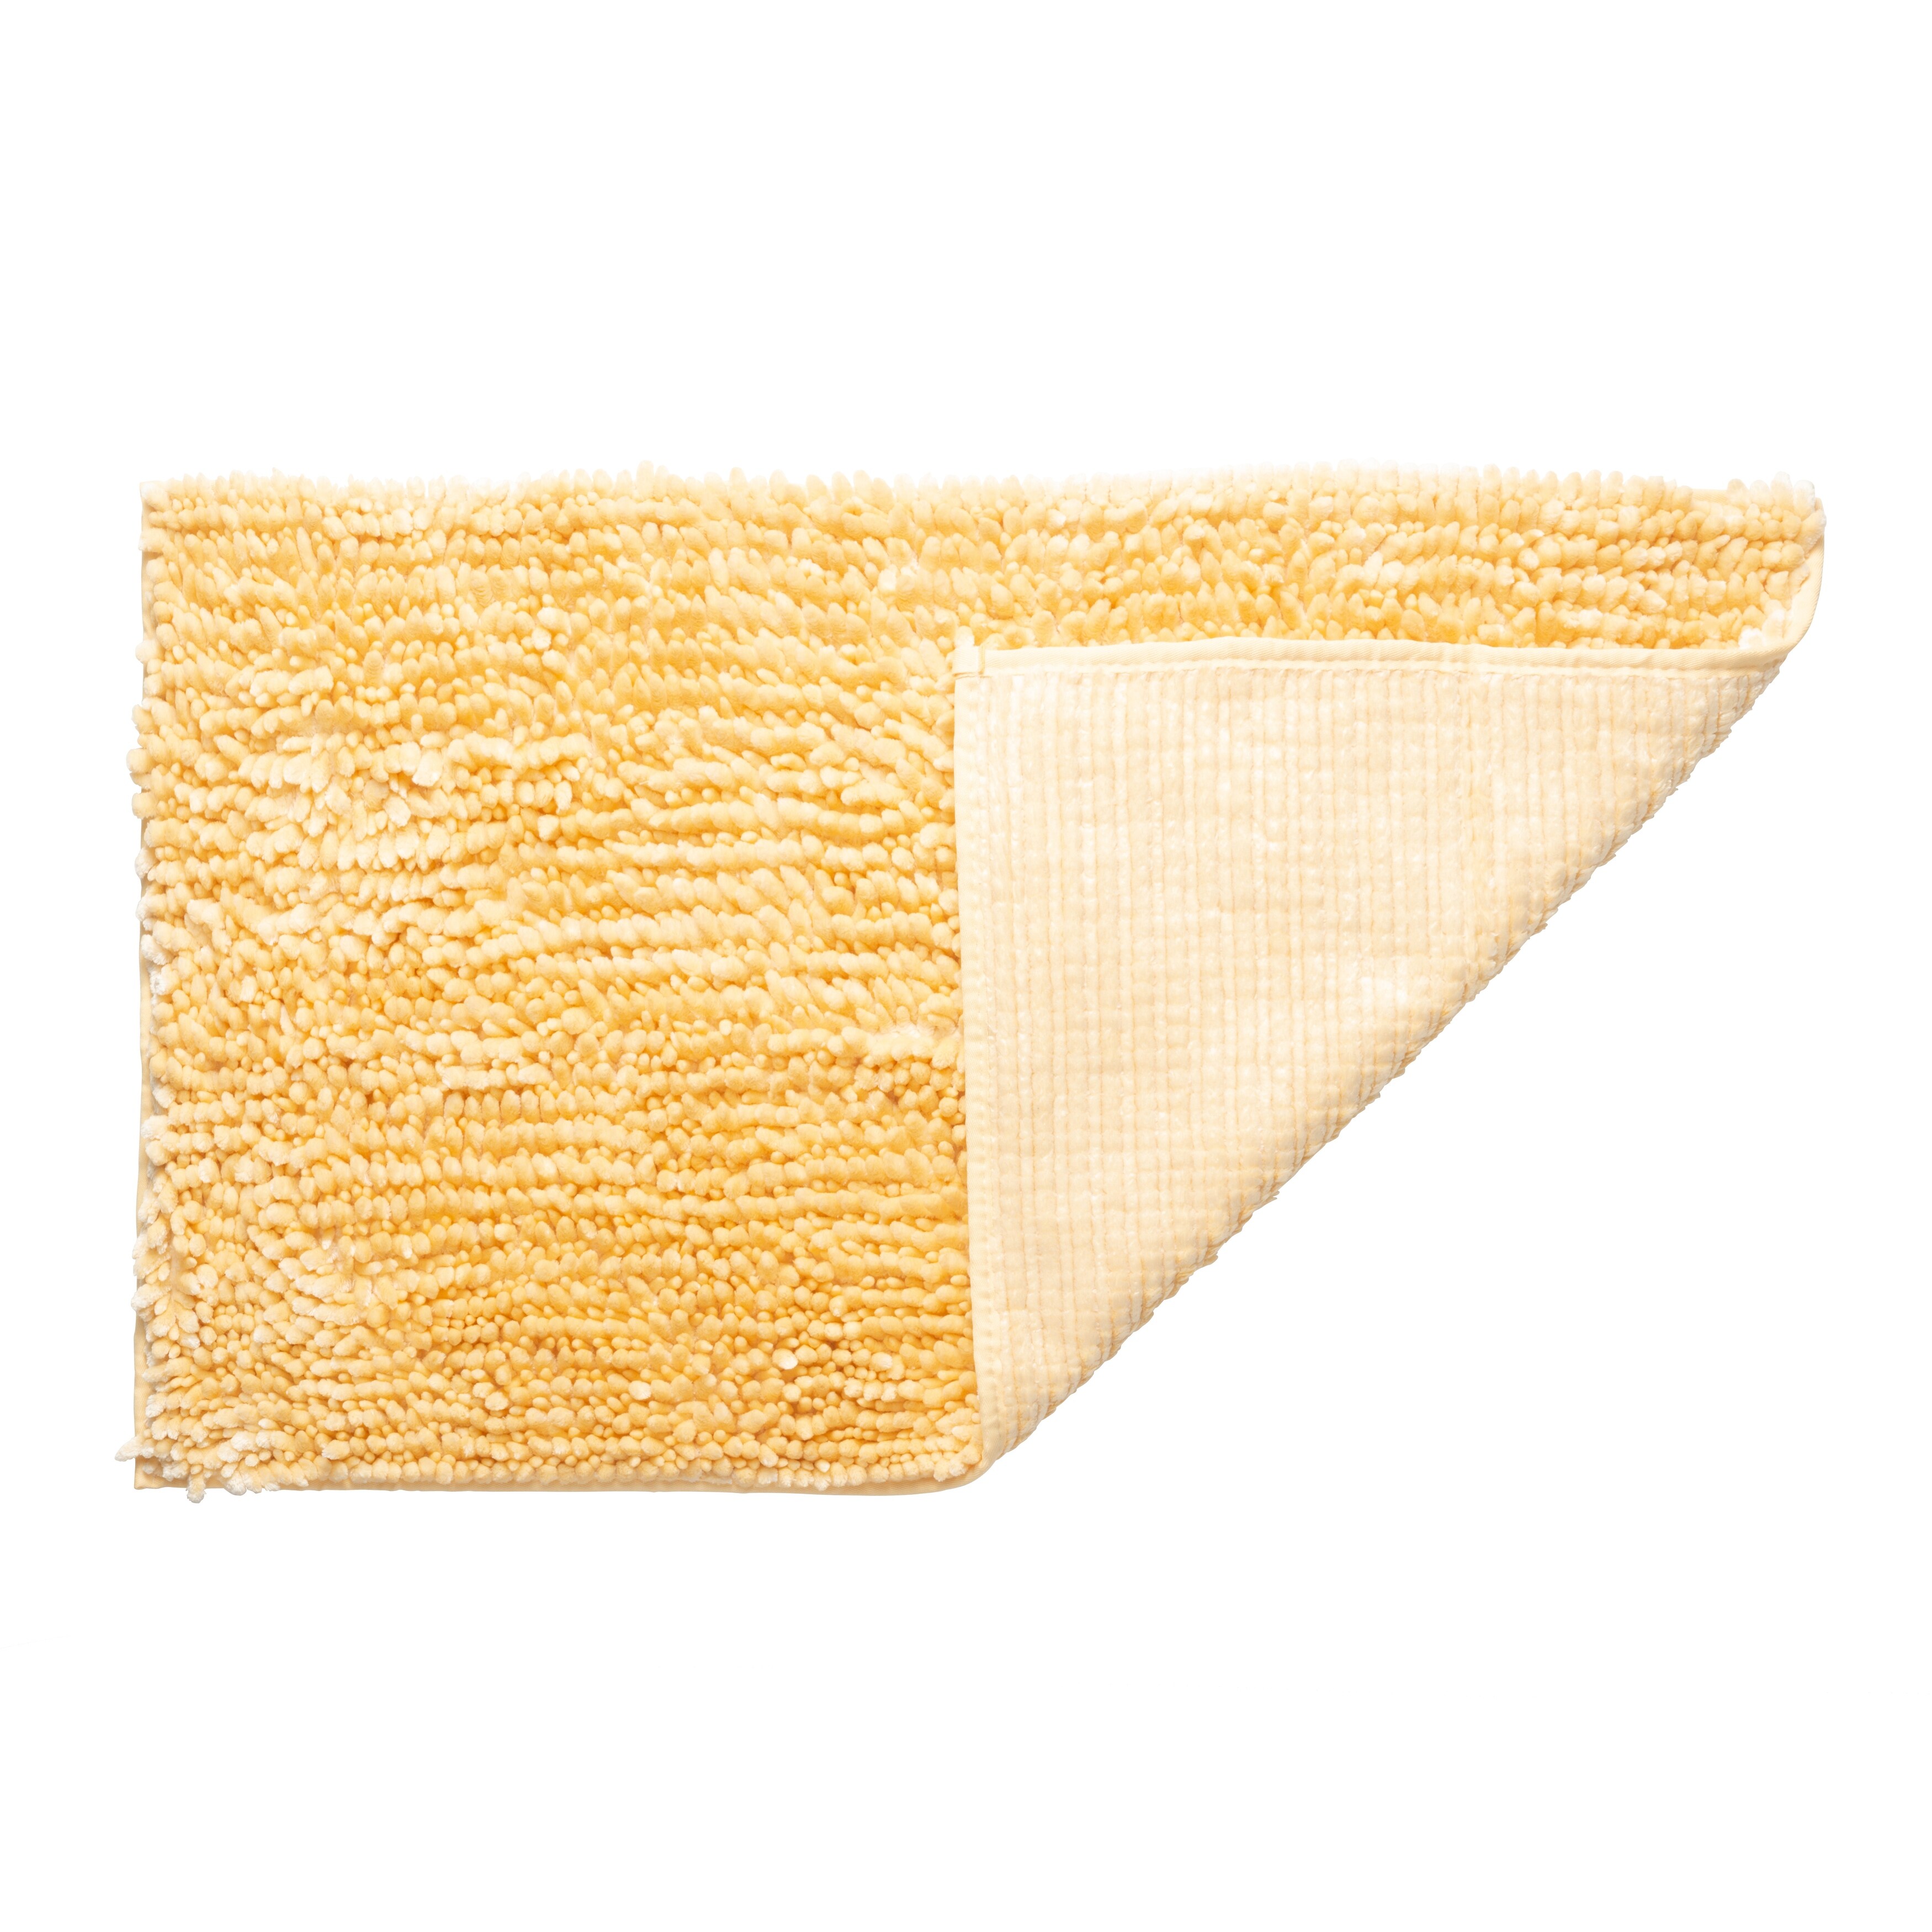 https://ak1.ostkcdn.com/images/products/is/images/direct/11f4c45a67932ae255aadc892db7204af3b13768/Laura-Ashley-Butter-Chenille-Bath-Mat-27x45-Inches.jpg